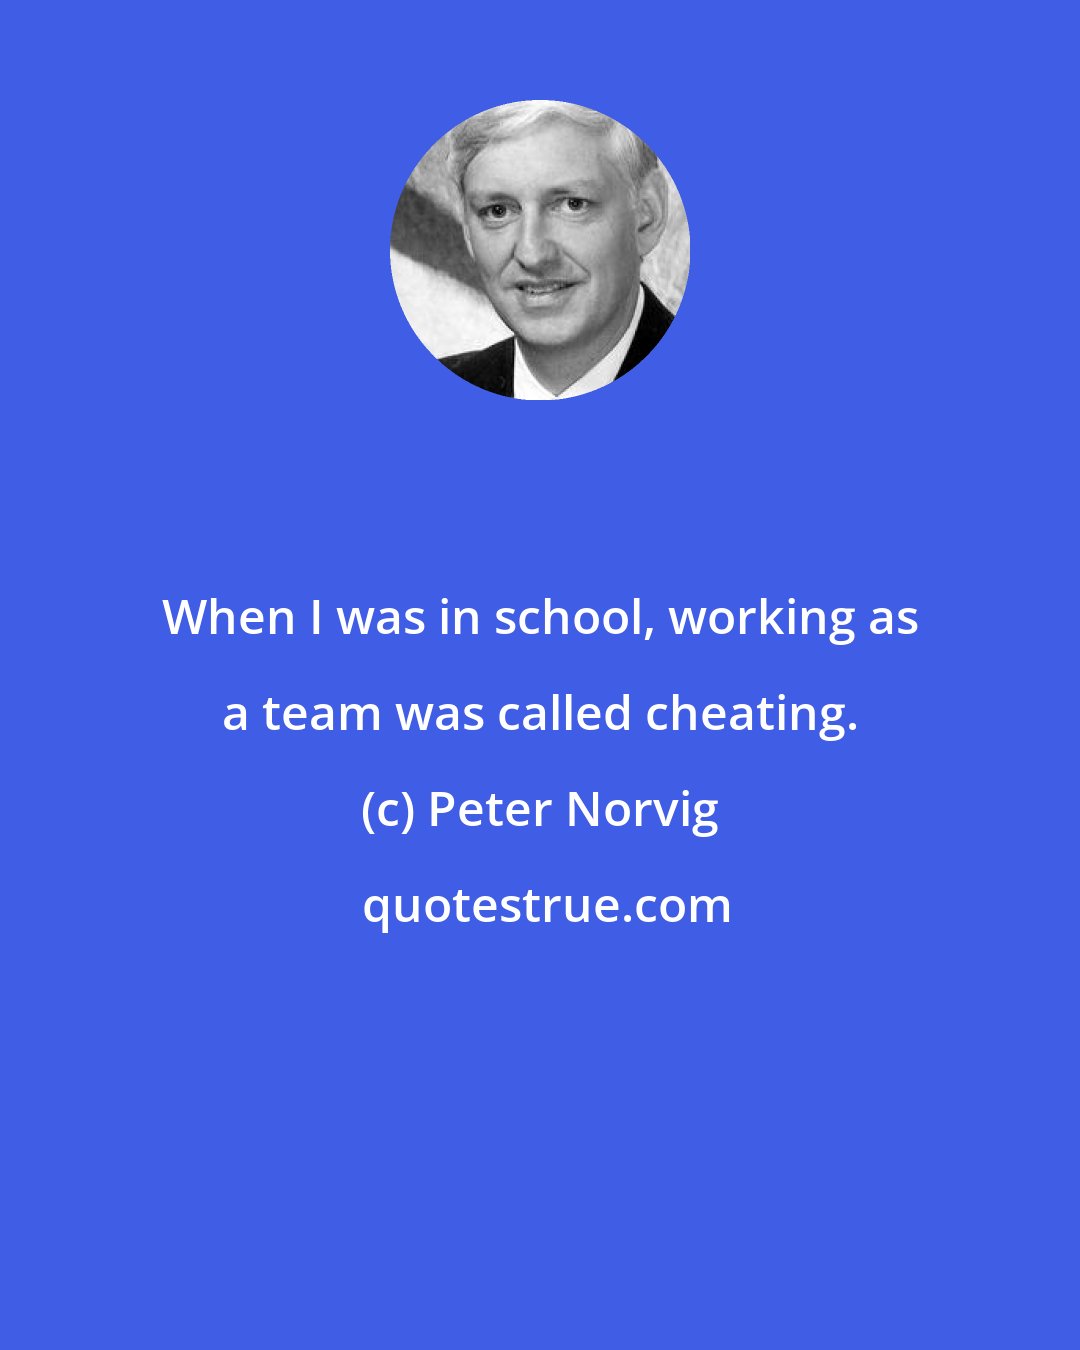 Peter Norvig: When I was in school, working as a team was called cheating.